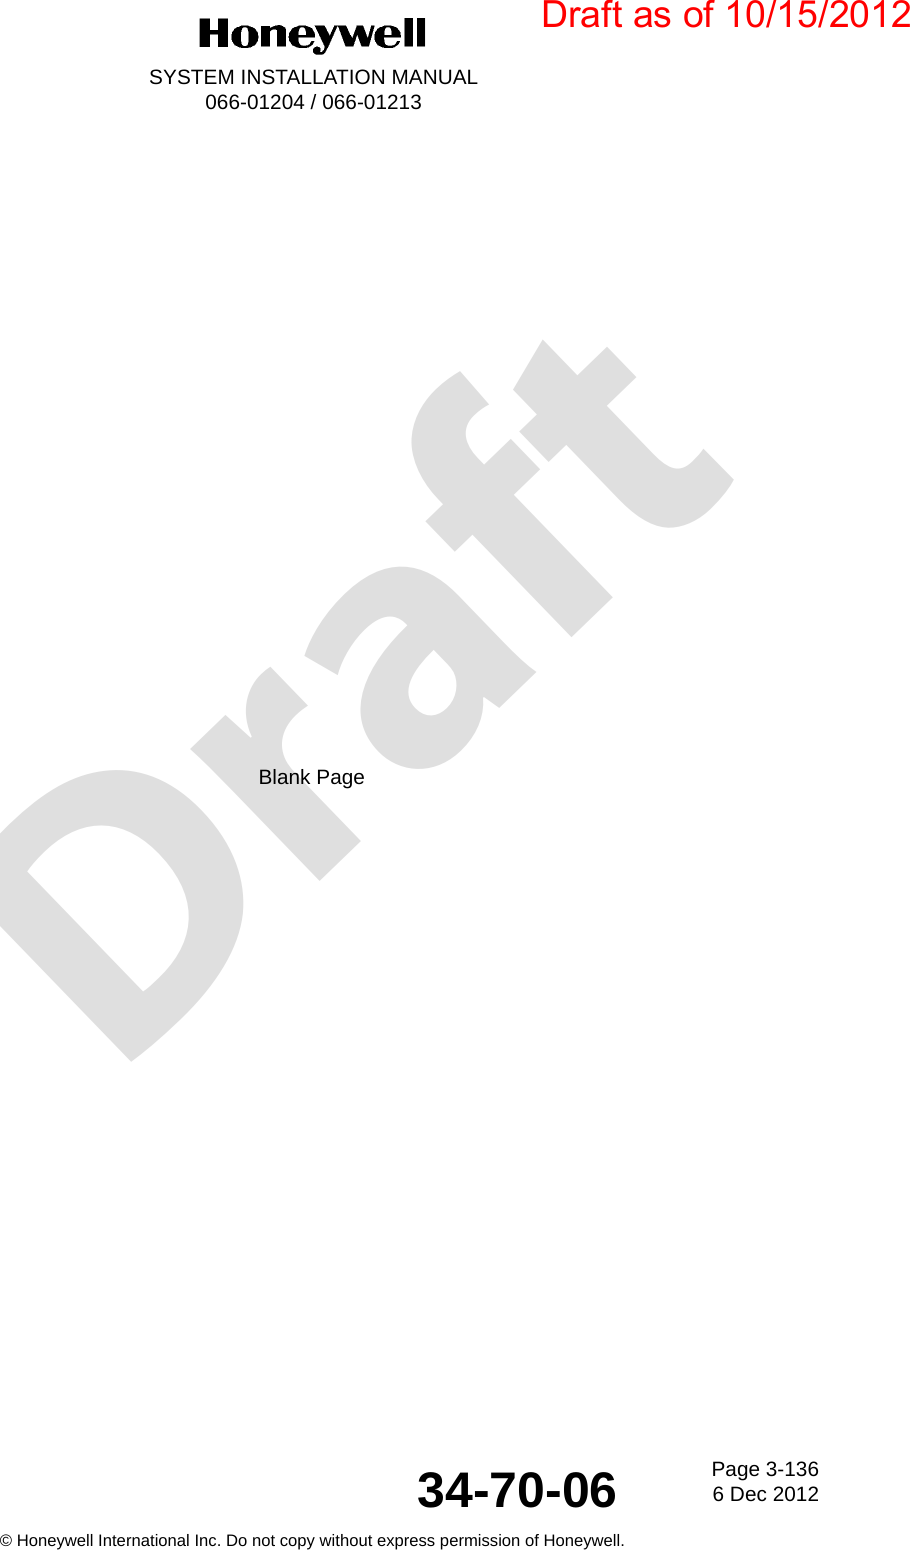 DraftPage 3-1366 Dec 201234-70-06SYSTEM INSTALLATION MANUAL066-01204 / 066-01213© Honeywell International Inc. Do not copy without express permission of Honeywell.Blank PageDraft as of 10/15/2012